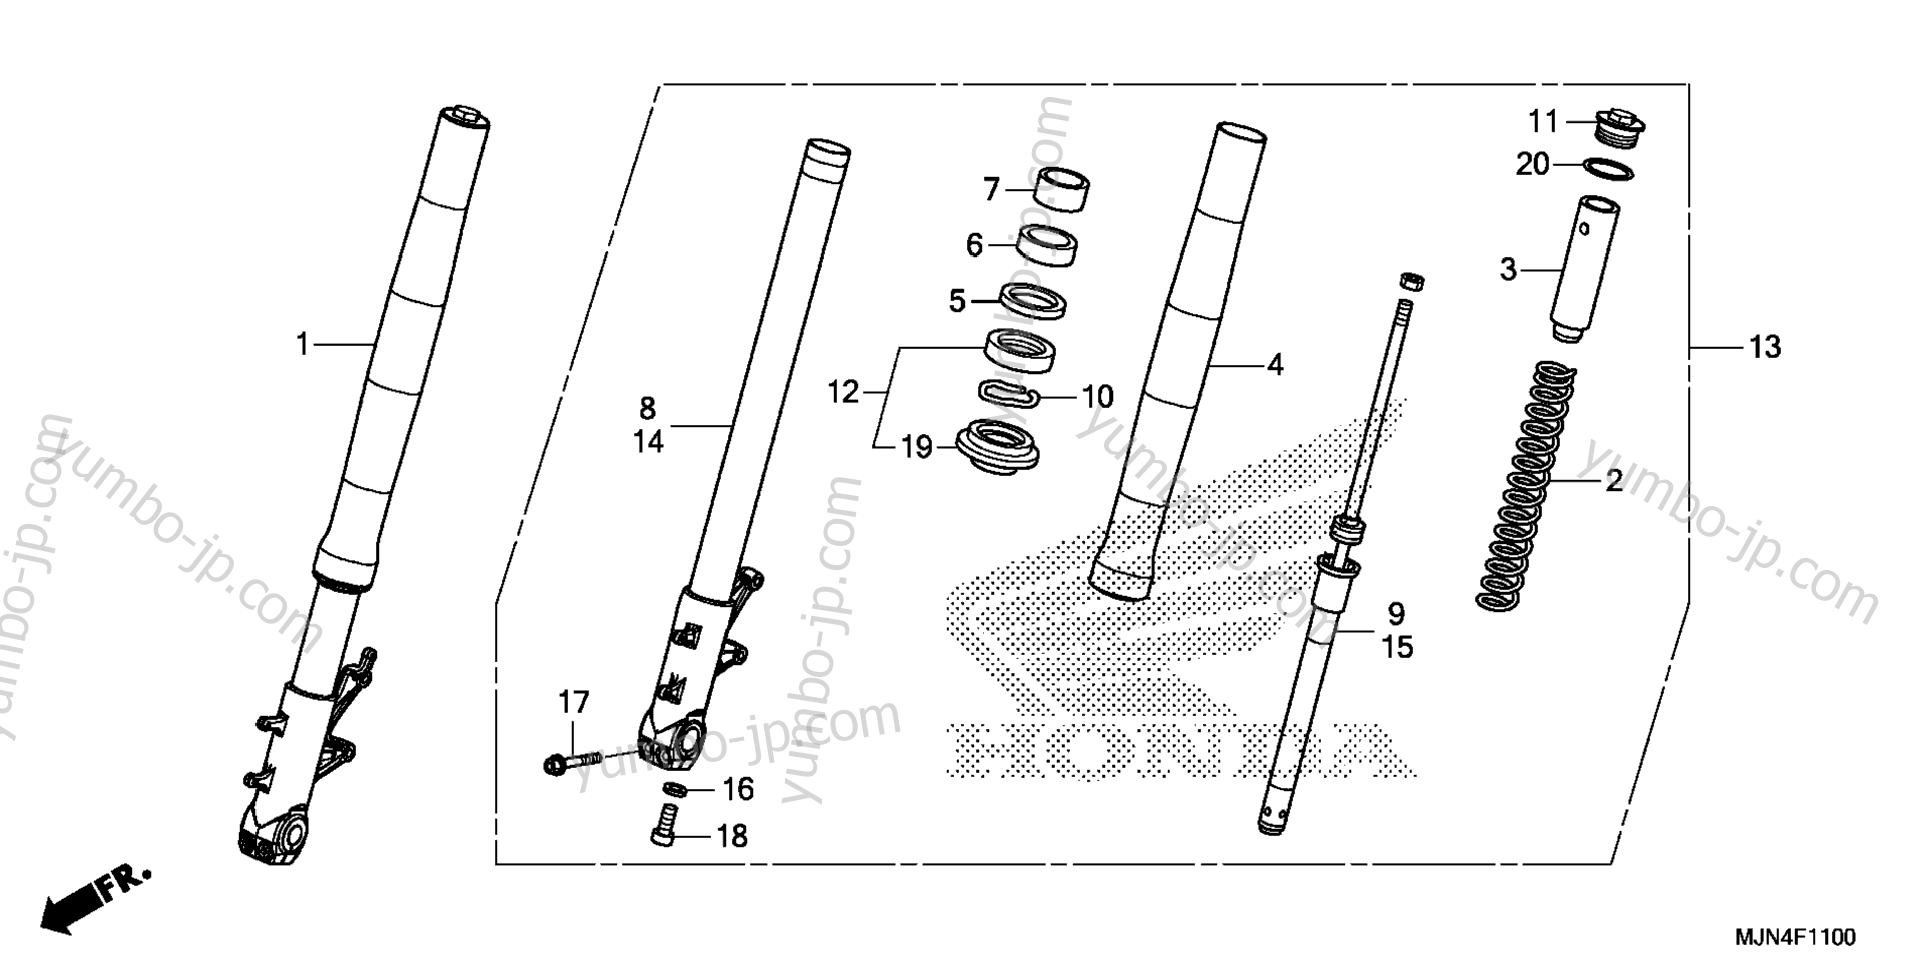 FRONT FORK for motorcycles HONDA CTX1300 AC 2014 year